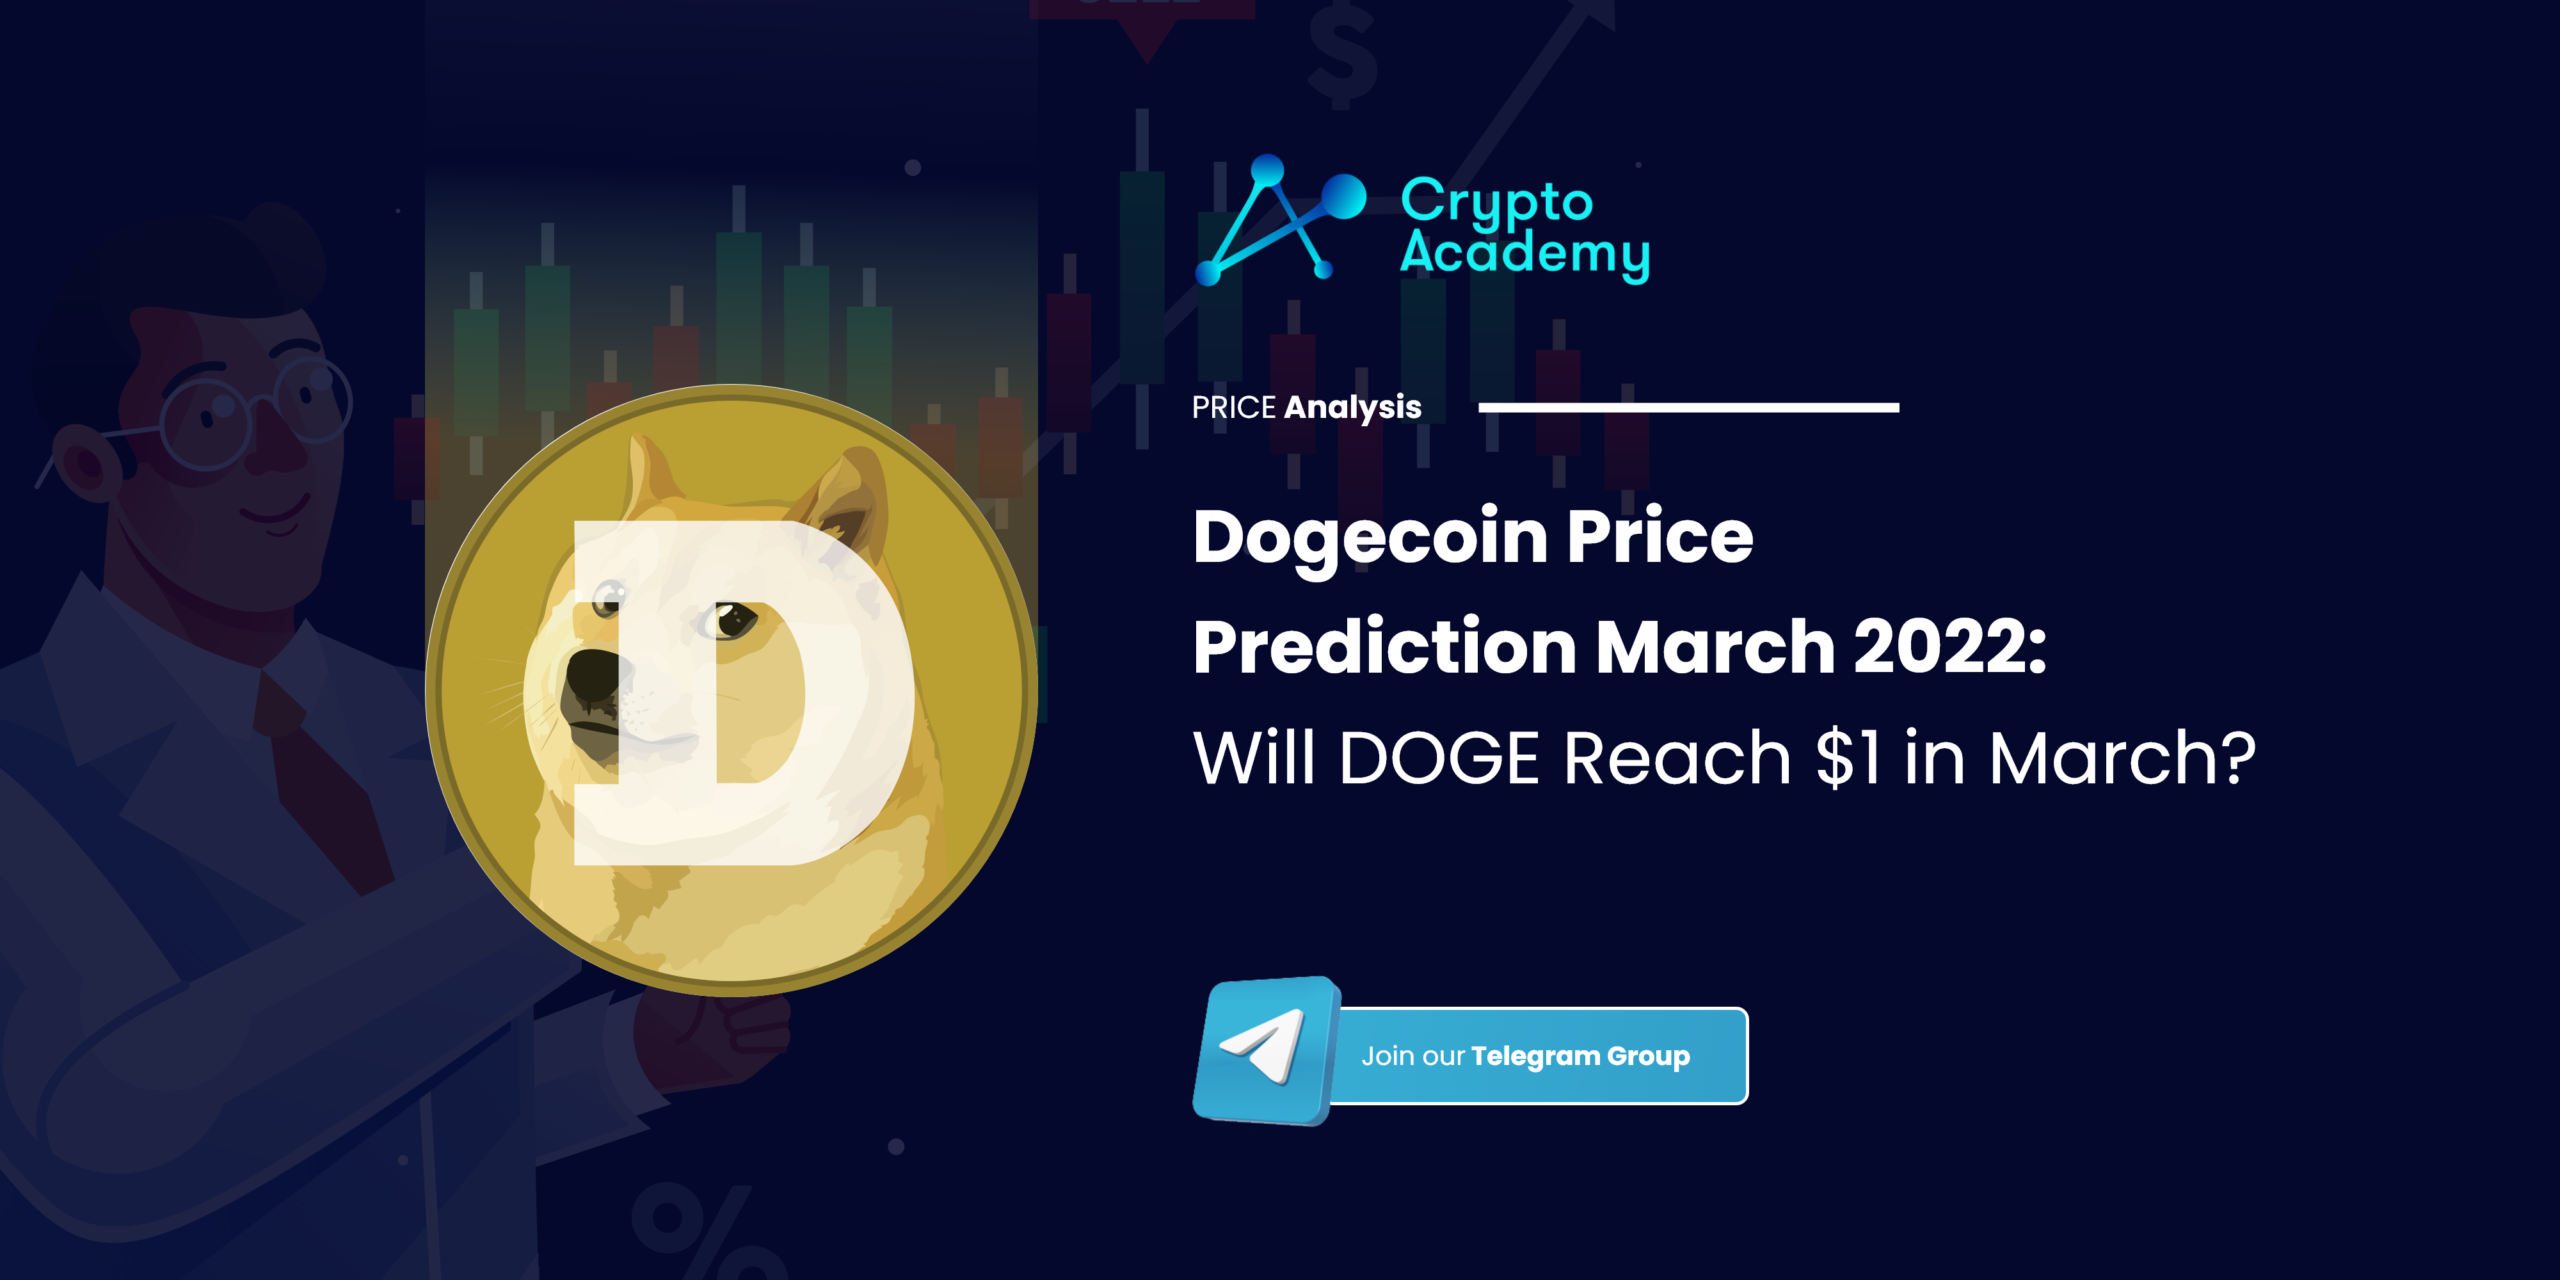 Dogecoin Price Prediction March 2022: Will DOGE Reach $1 in March?